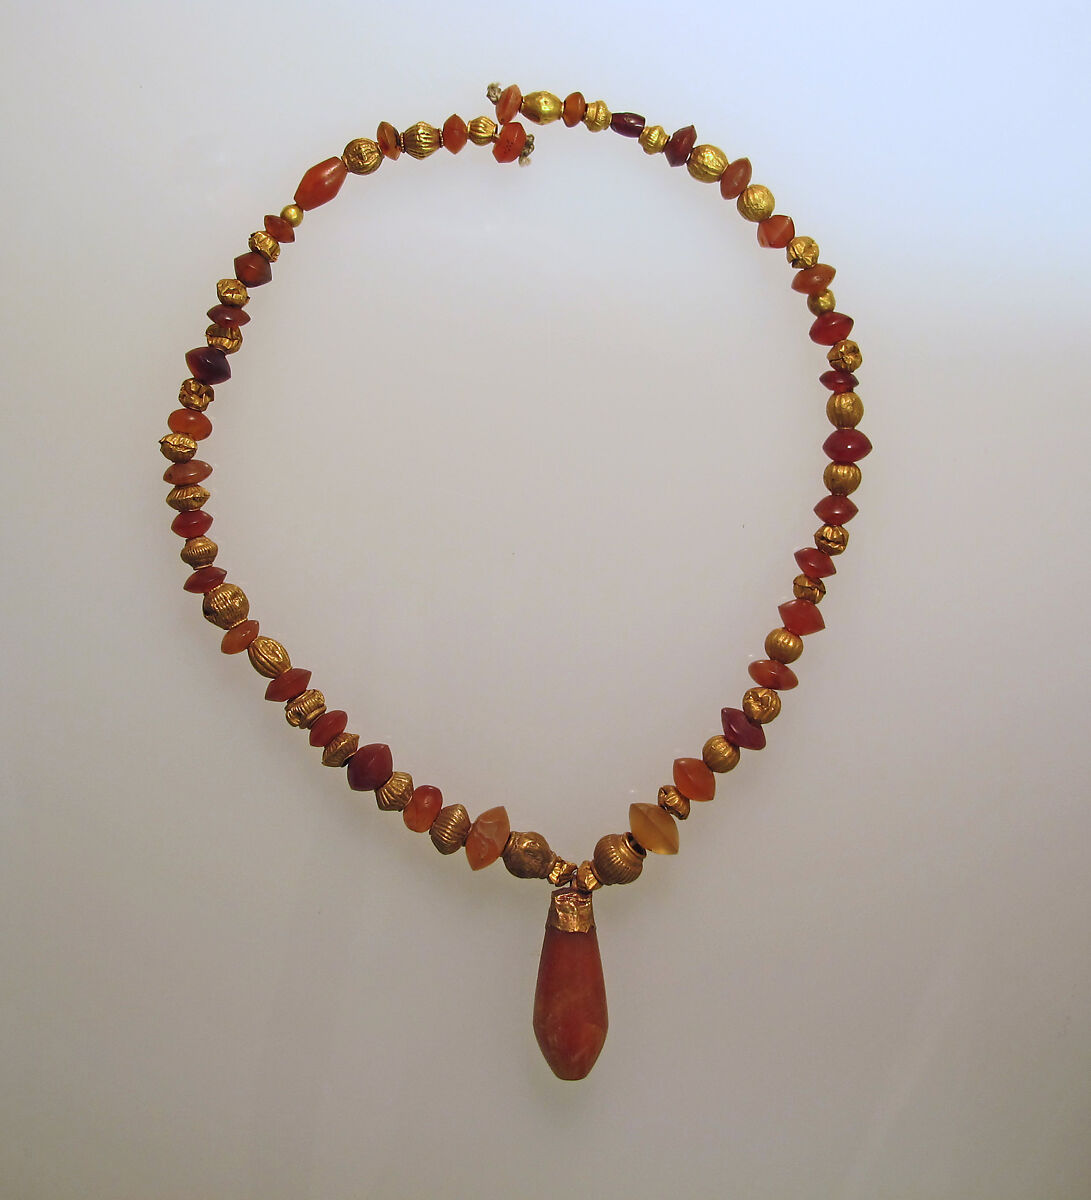 Necklace of gold and carnelian beads, with gold-capped carnelian pendant, Gold, sard, Cypriot 